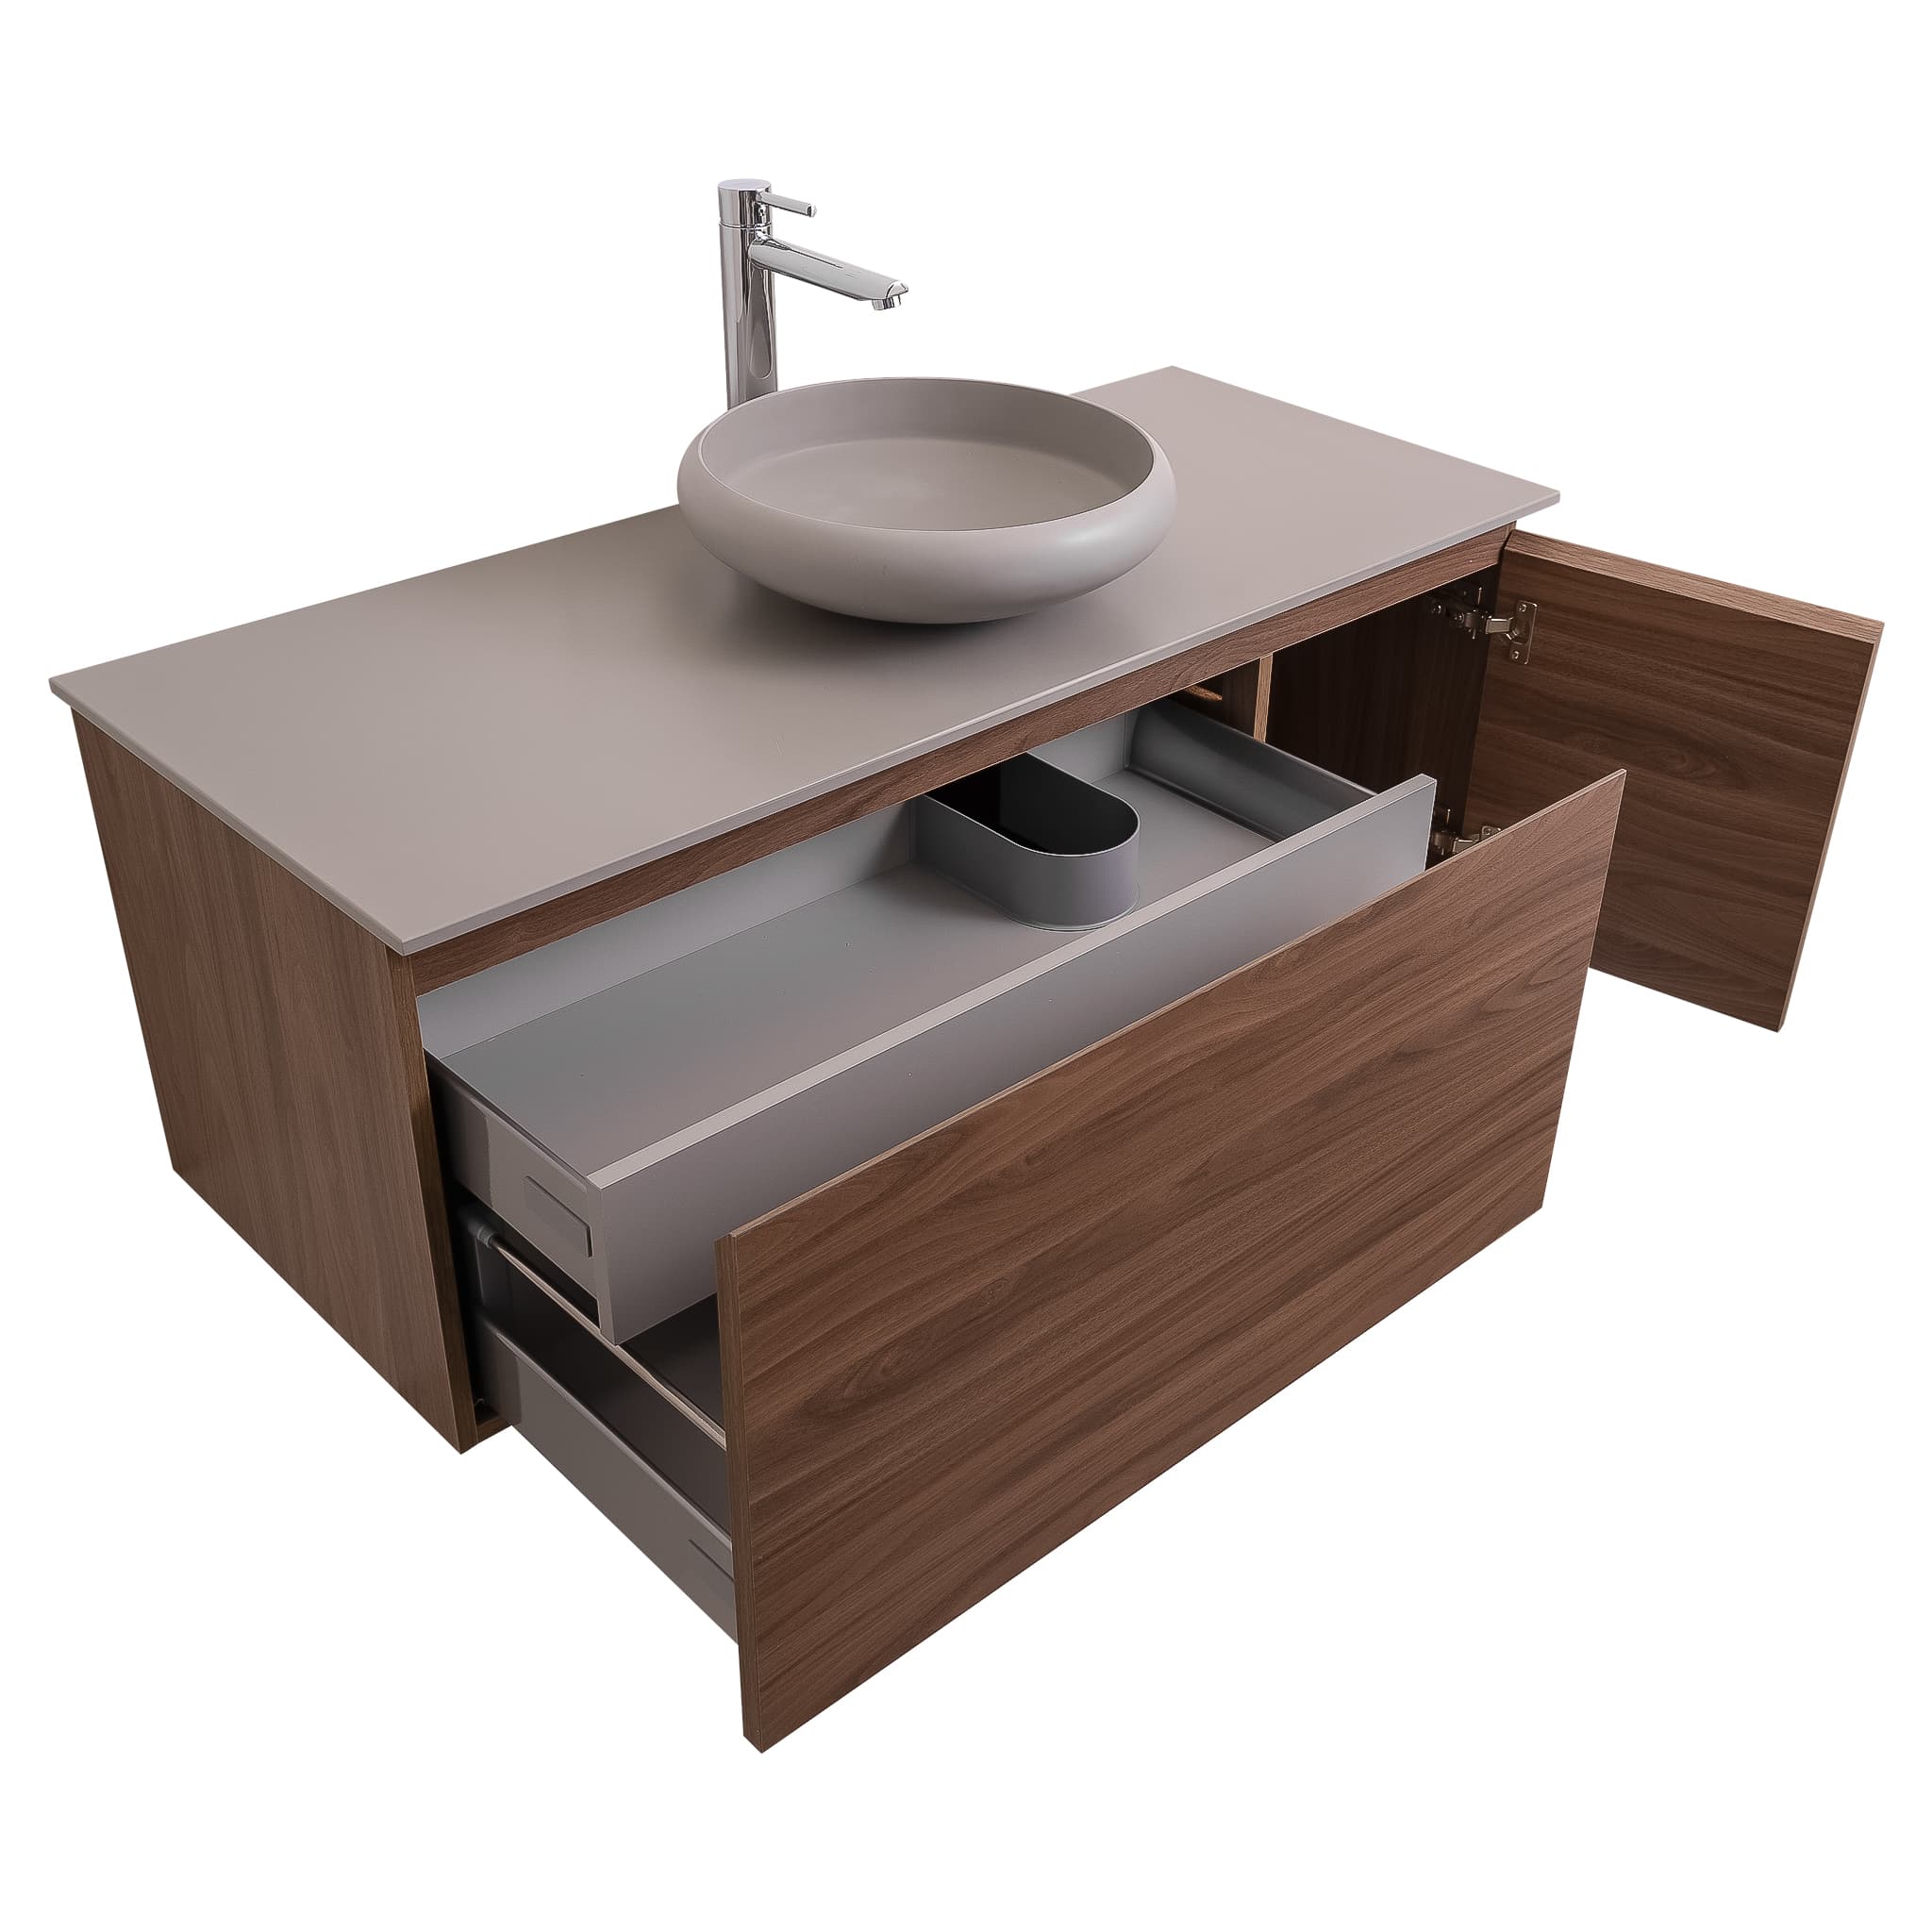 Venice 47.5 Walnut Wood Texture Cabinet, Solid Surface Flat Grey Counter And Round Solid Surface Grey Basin 1153, Wall Mounted Modern Vanity Set